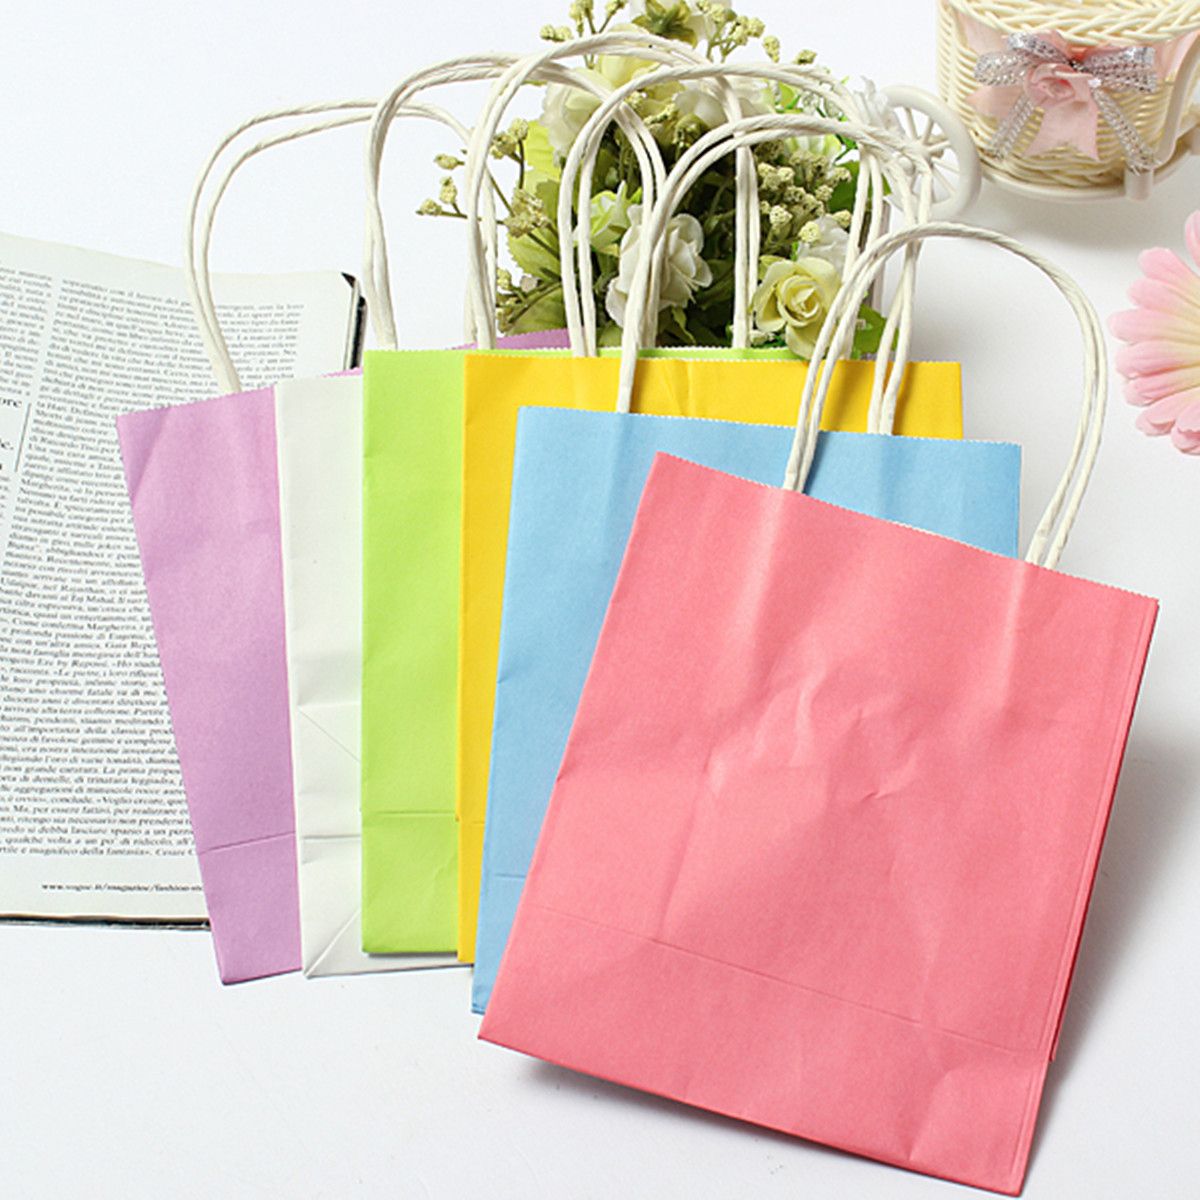 Colorful-Kraft-Paper-Gift-Bag-Wedding-Party-Handle-Paper-Gift-Bags-987091